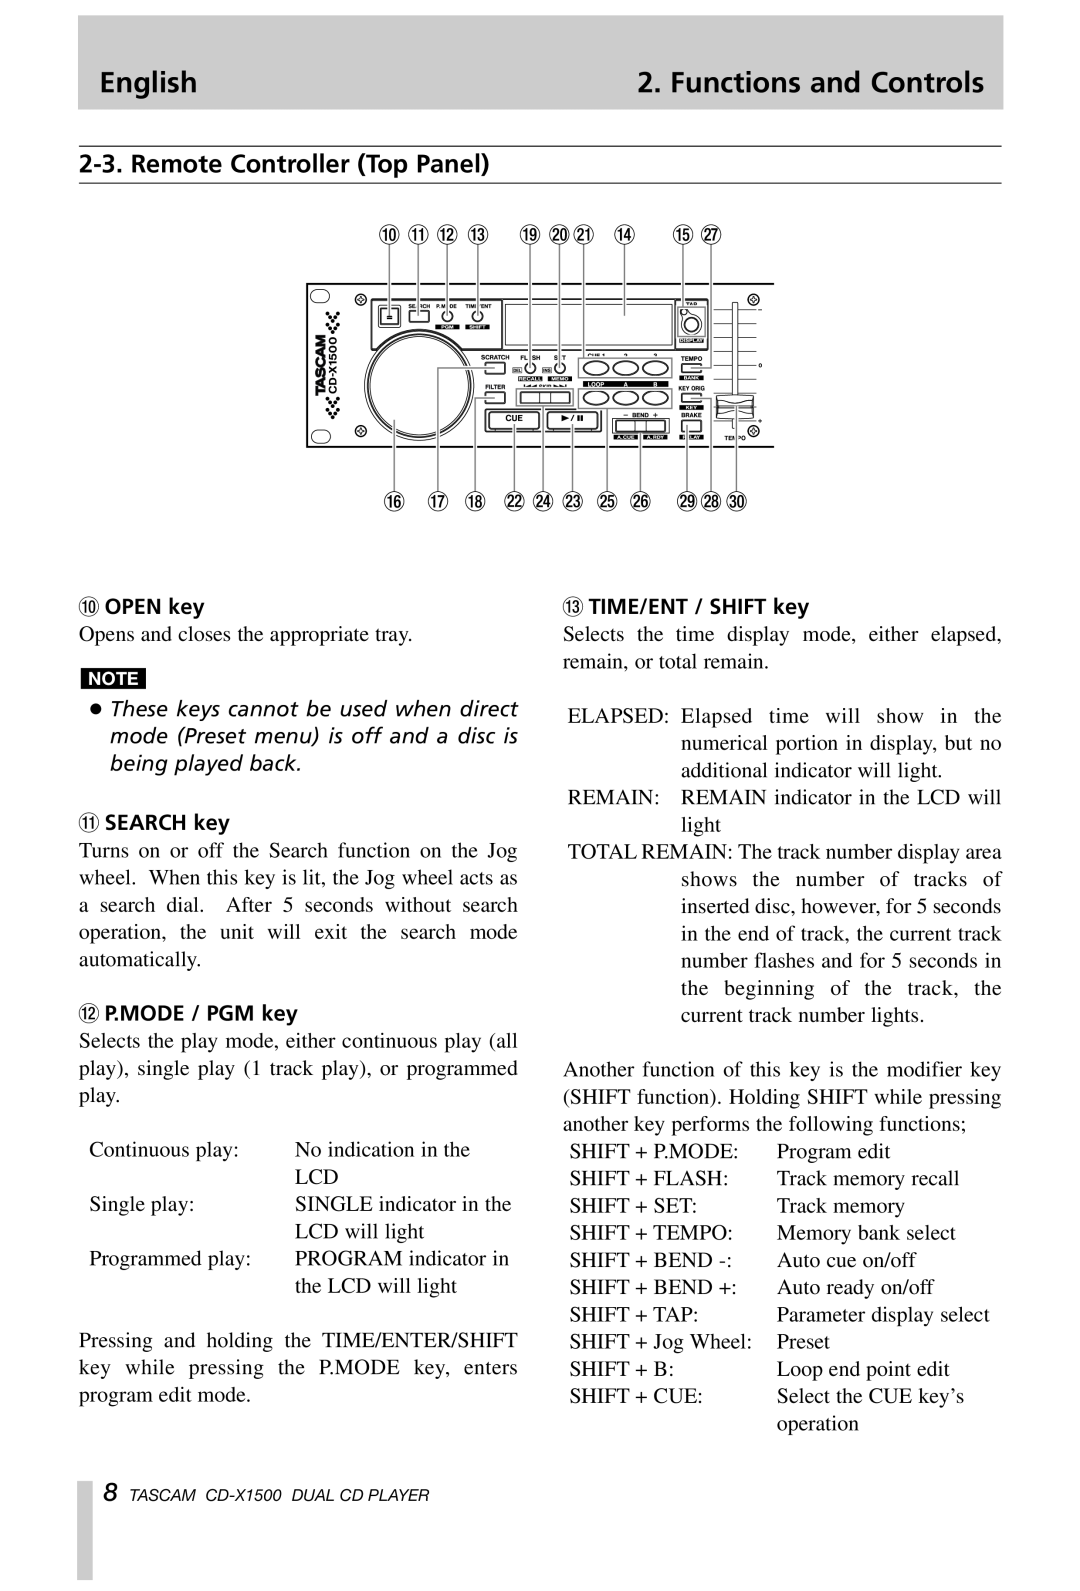 Tascam CD-X1500 owner manual Remote Controller Top Panel, English, Functions and Controls, OPEN key, e TIME/ENT / SHIFT key 